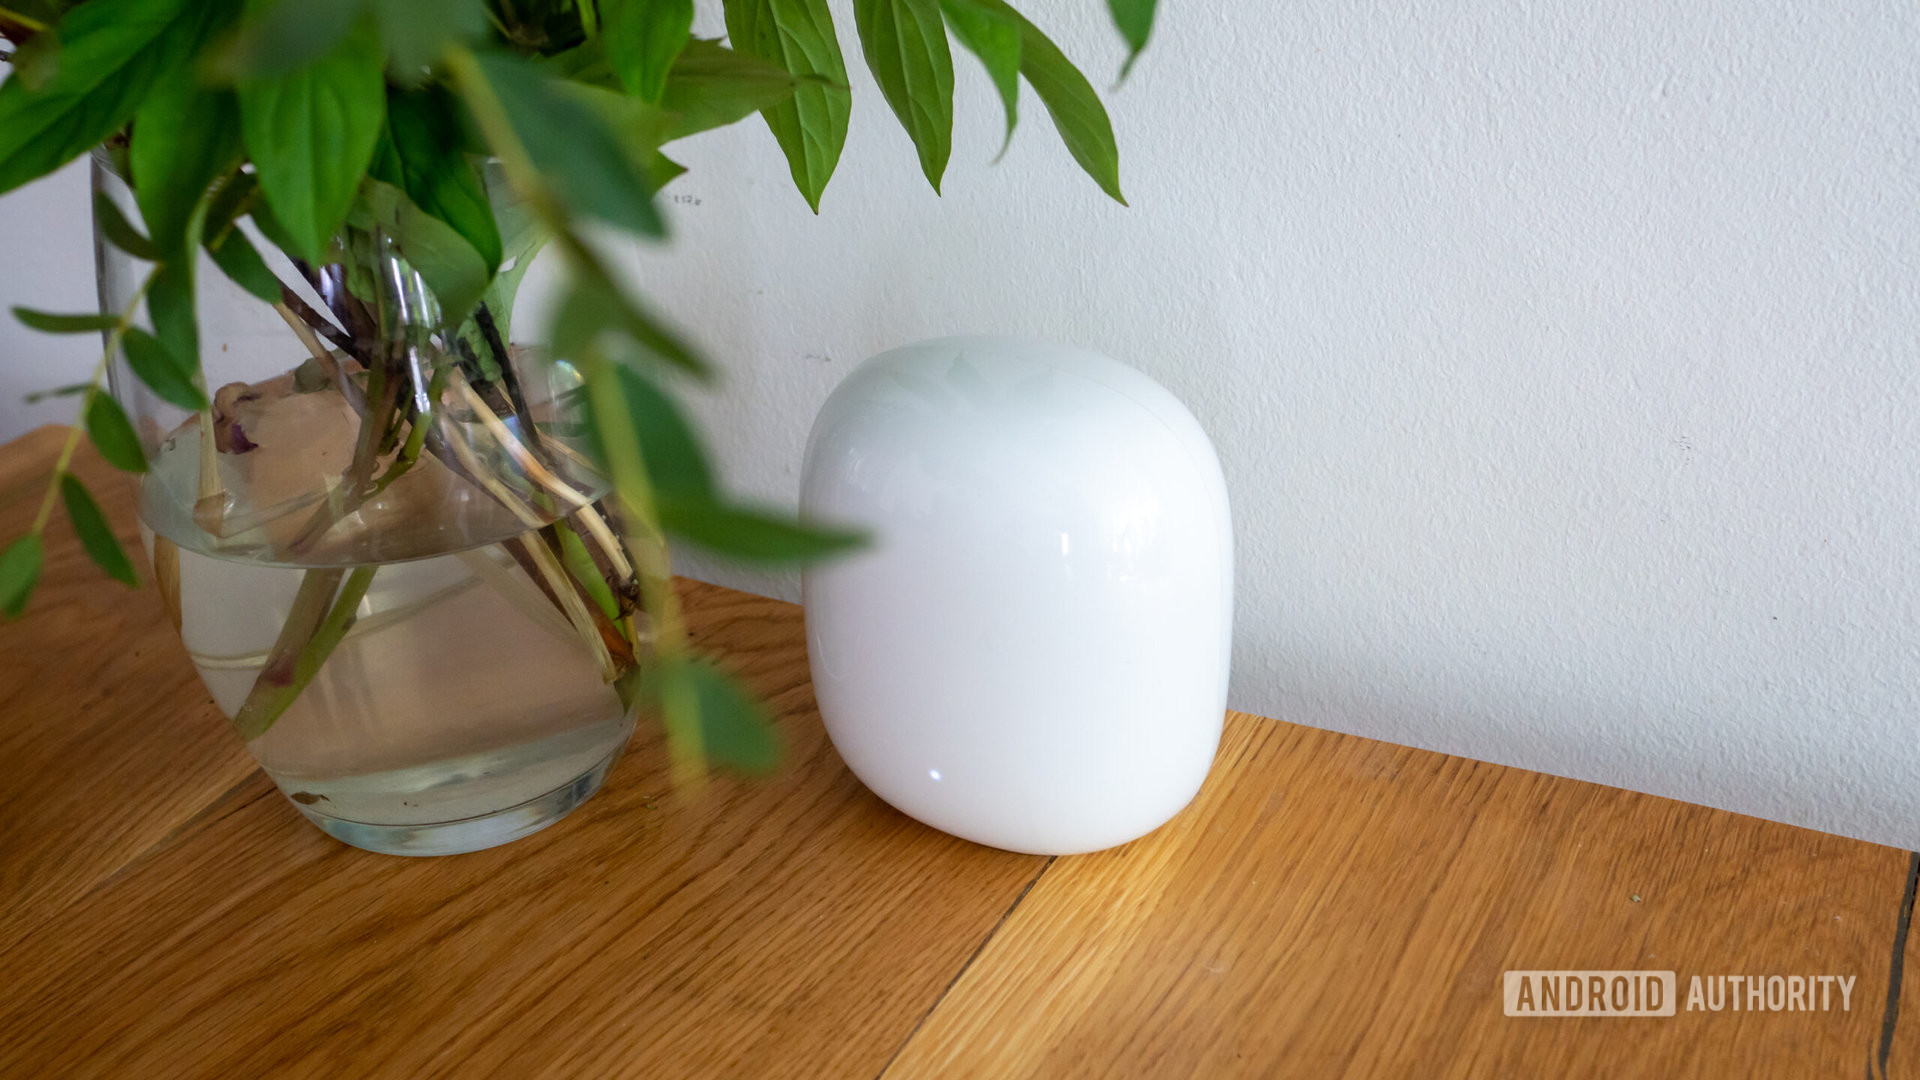 Google Nest Wi Fi Pro router elevated view on wooden table next to vase